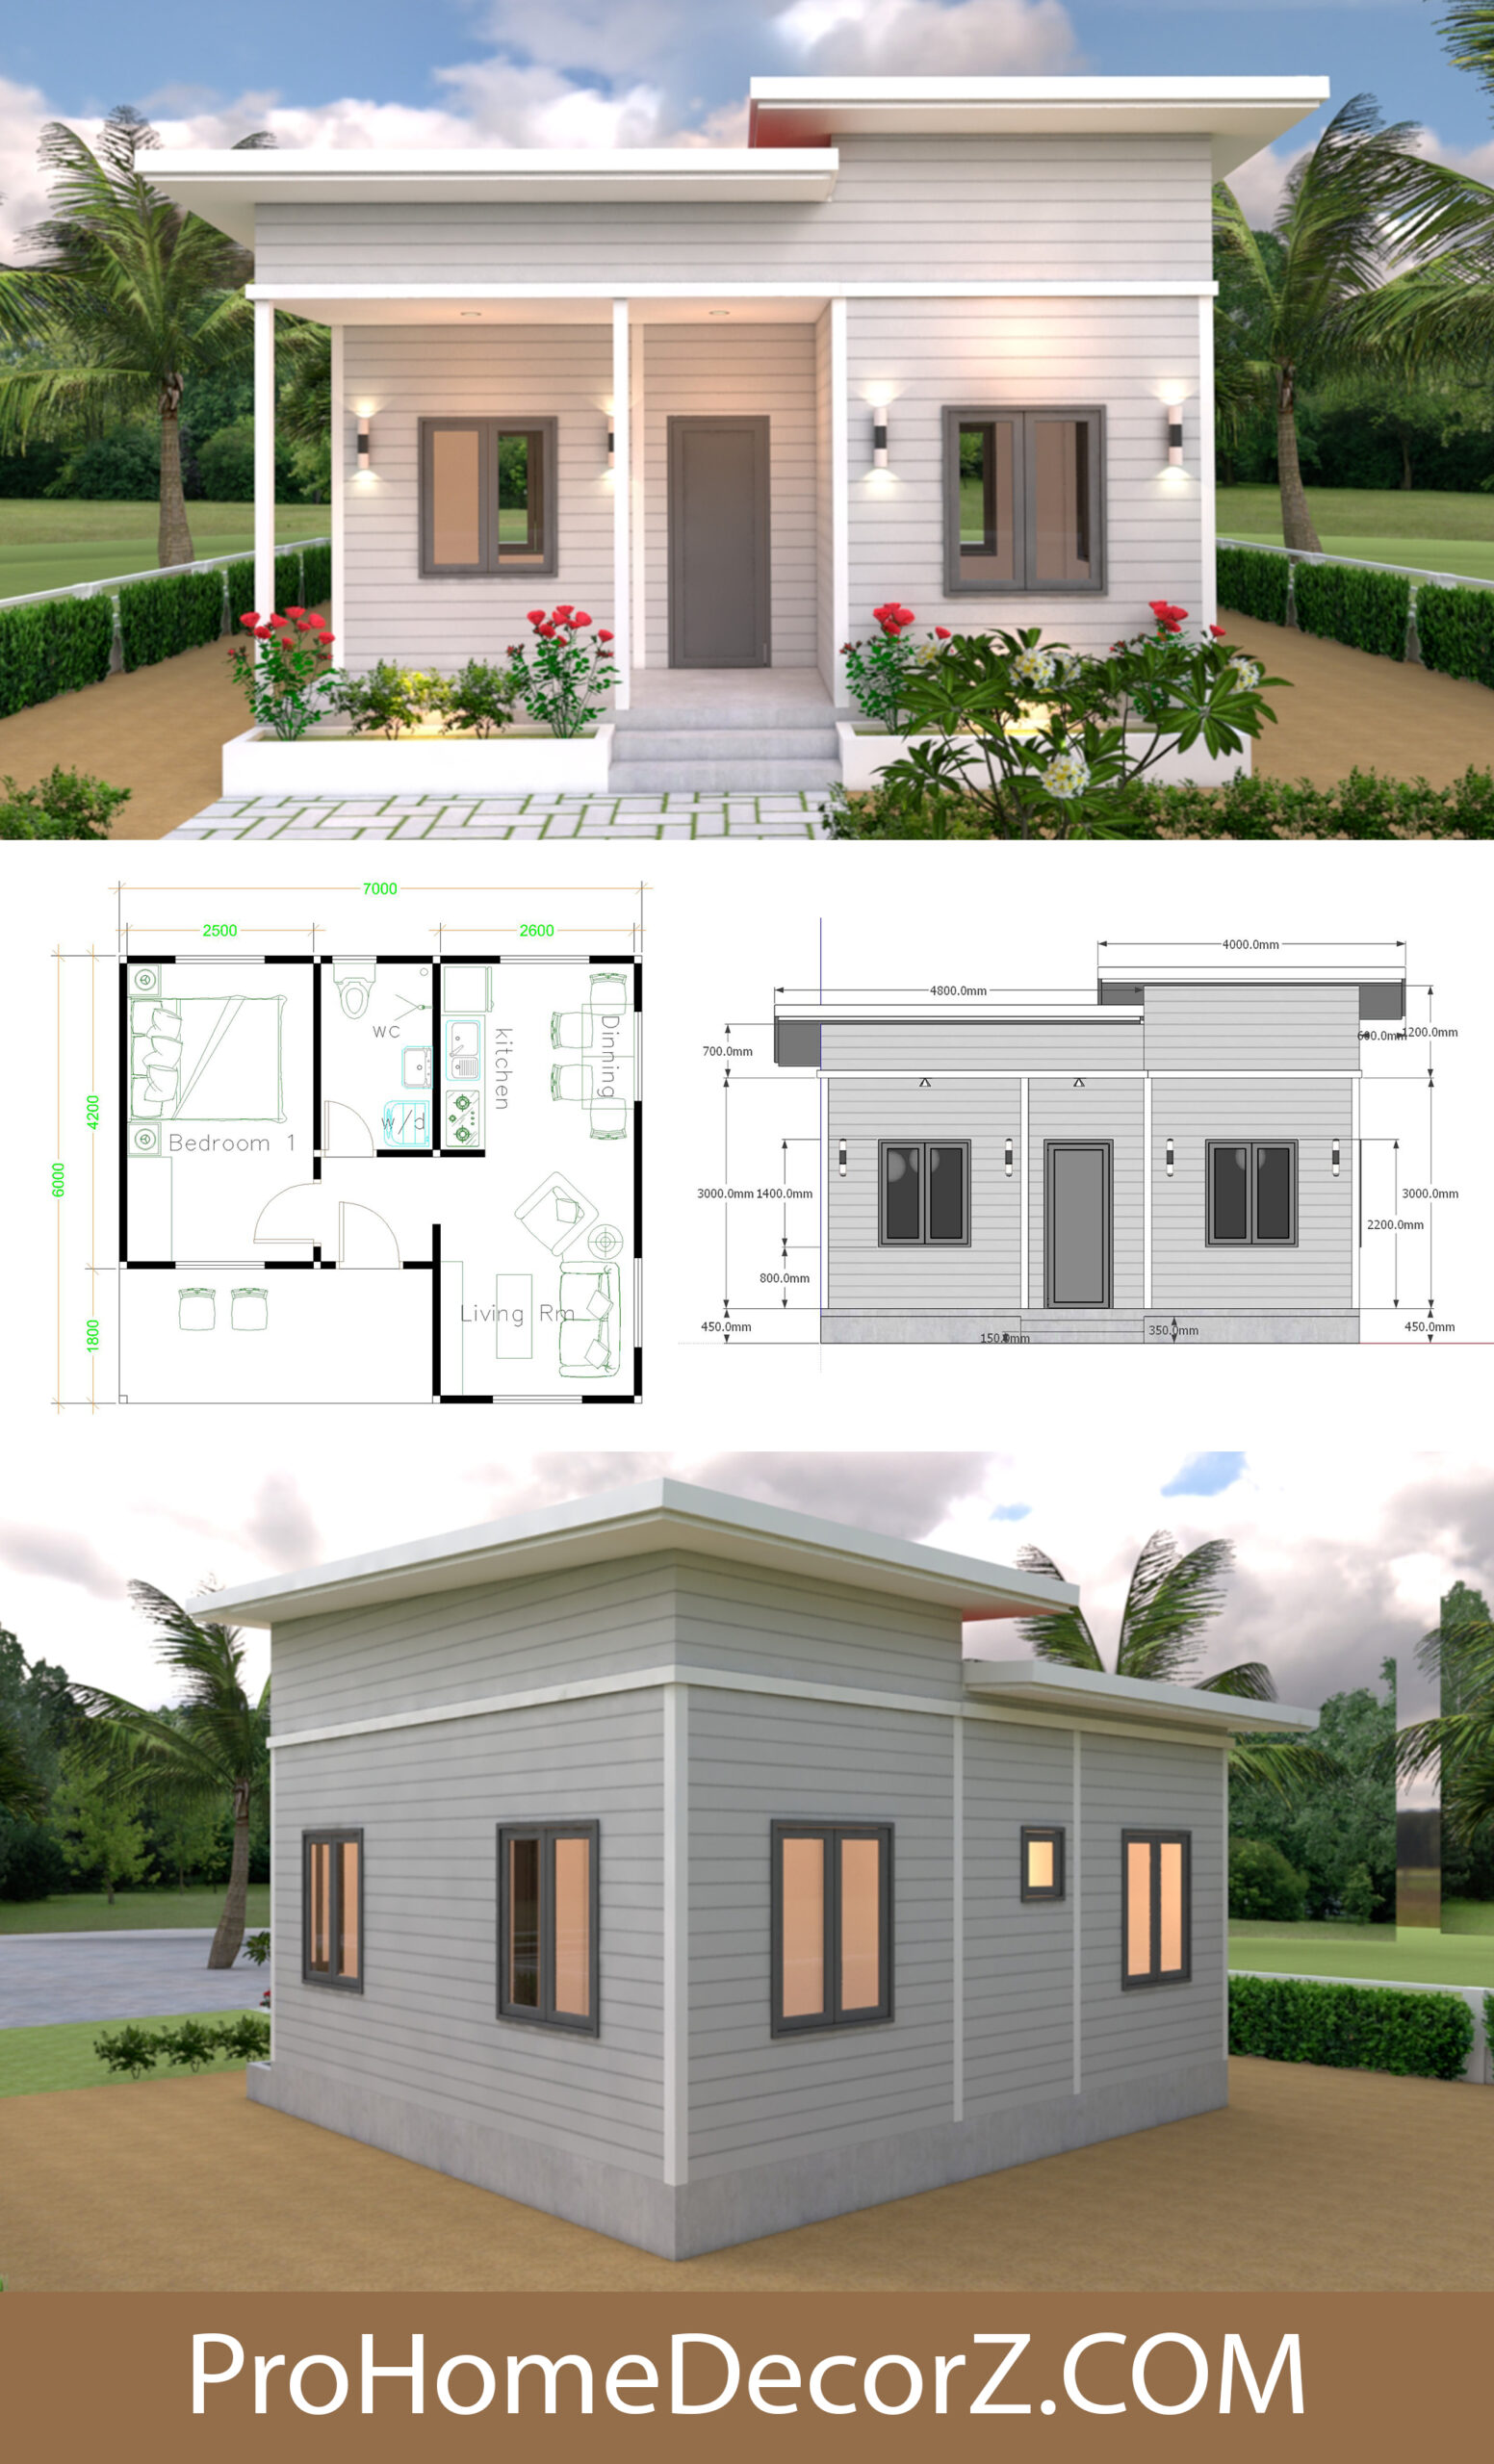 Shed roof Single Plans 7x6 Meters with Floor Plan